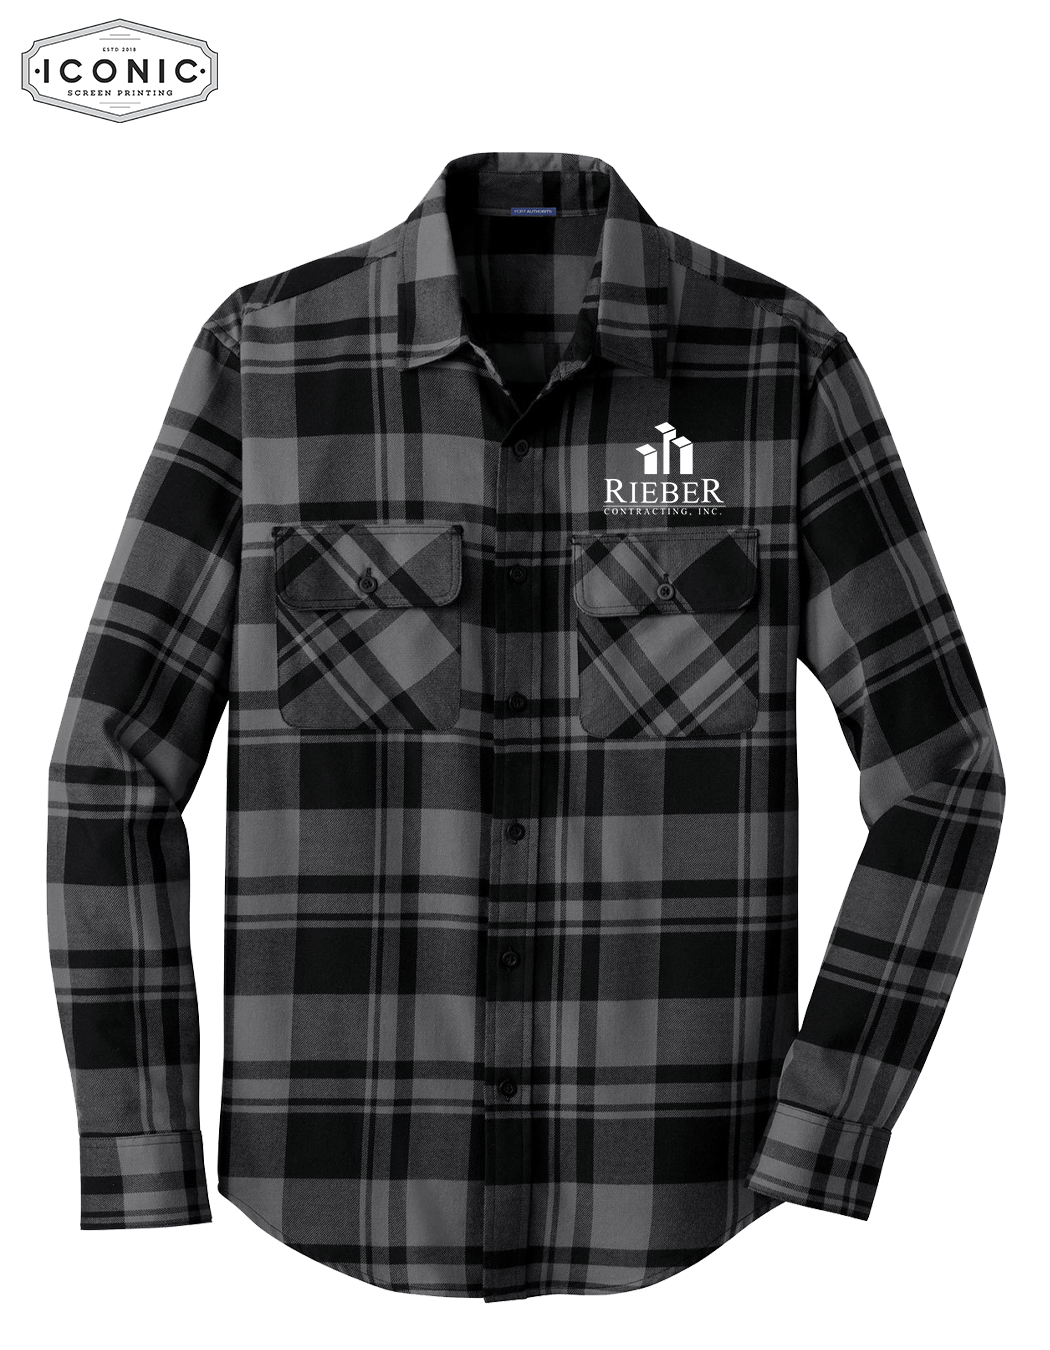 Rieber Contracting - Plaid Flannel Shirt - Embroidery